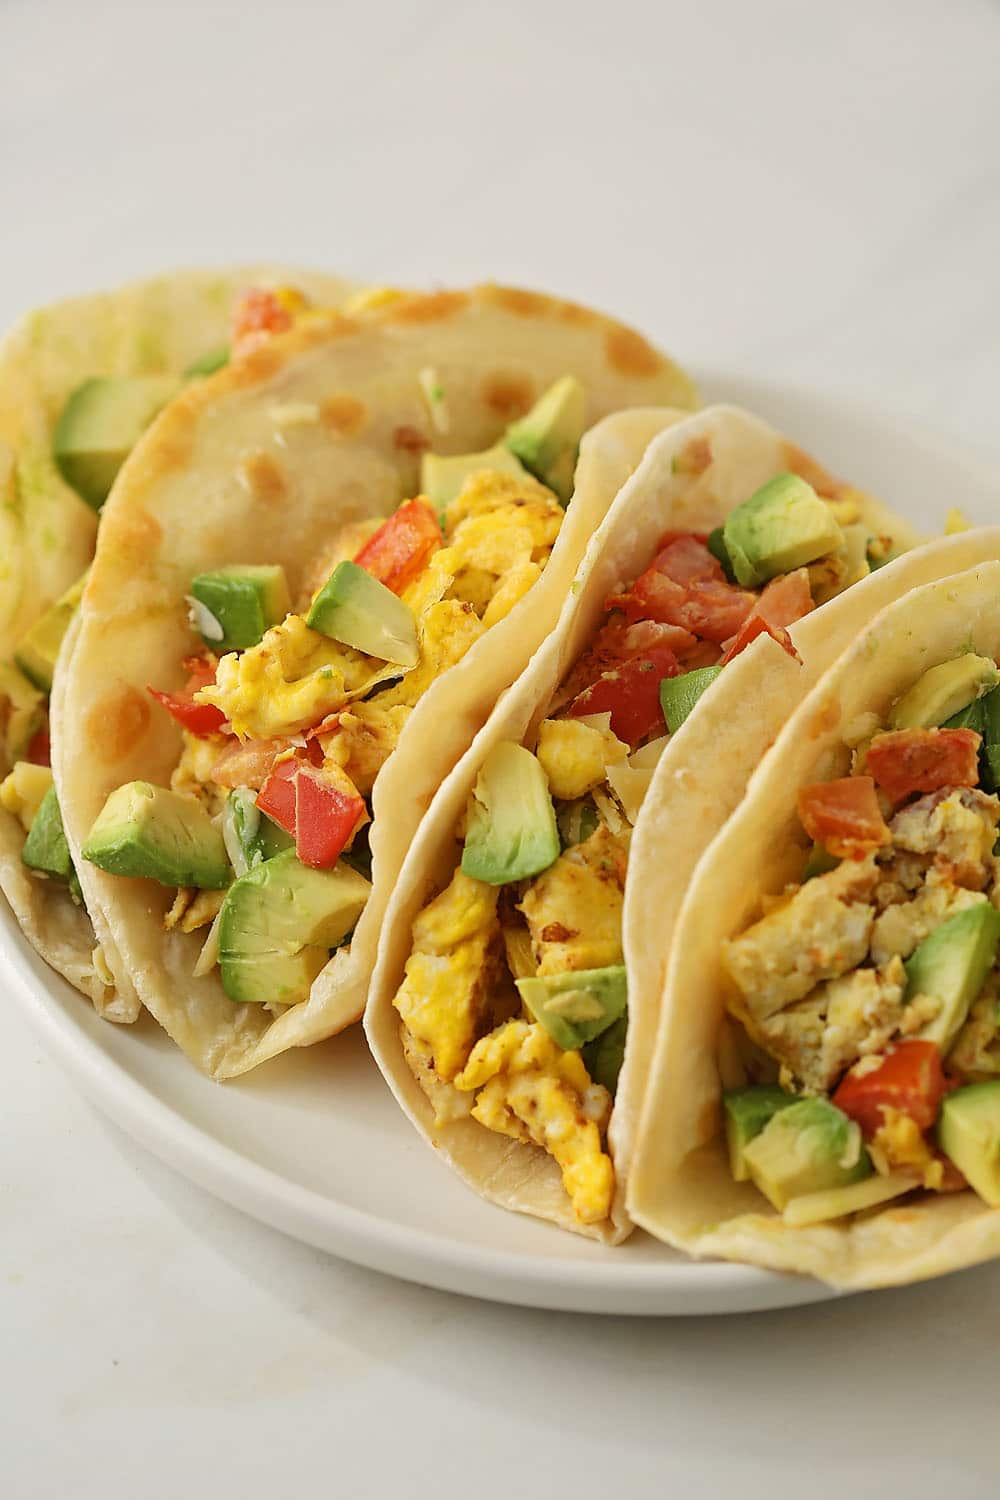 plate with tacos filled with scramble eggs and avocado